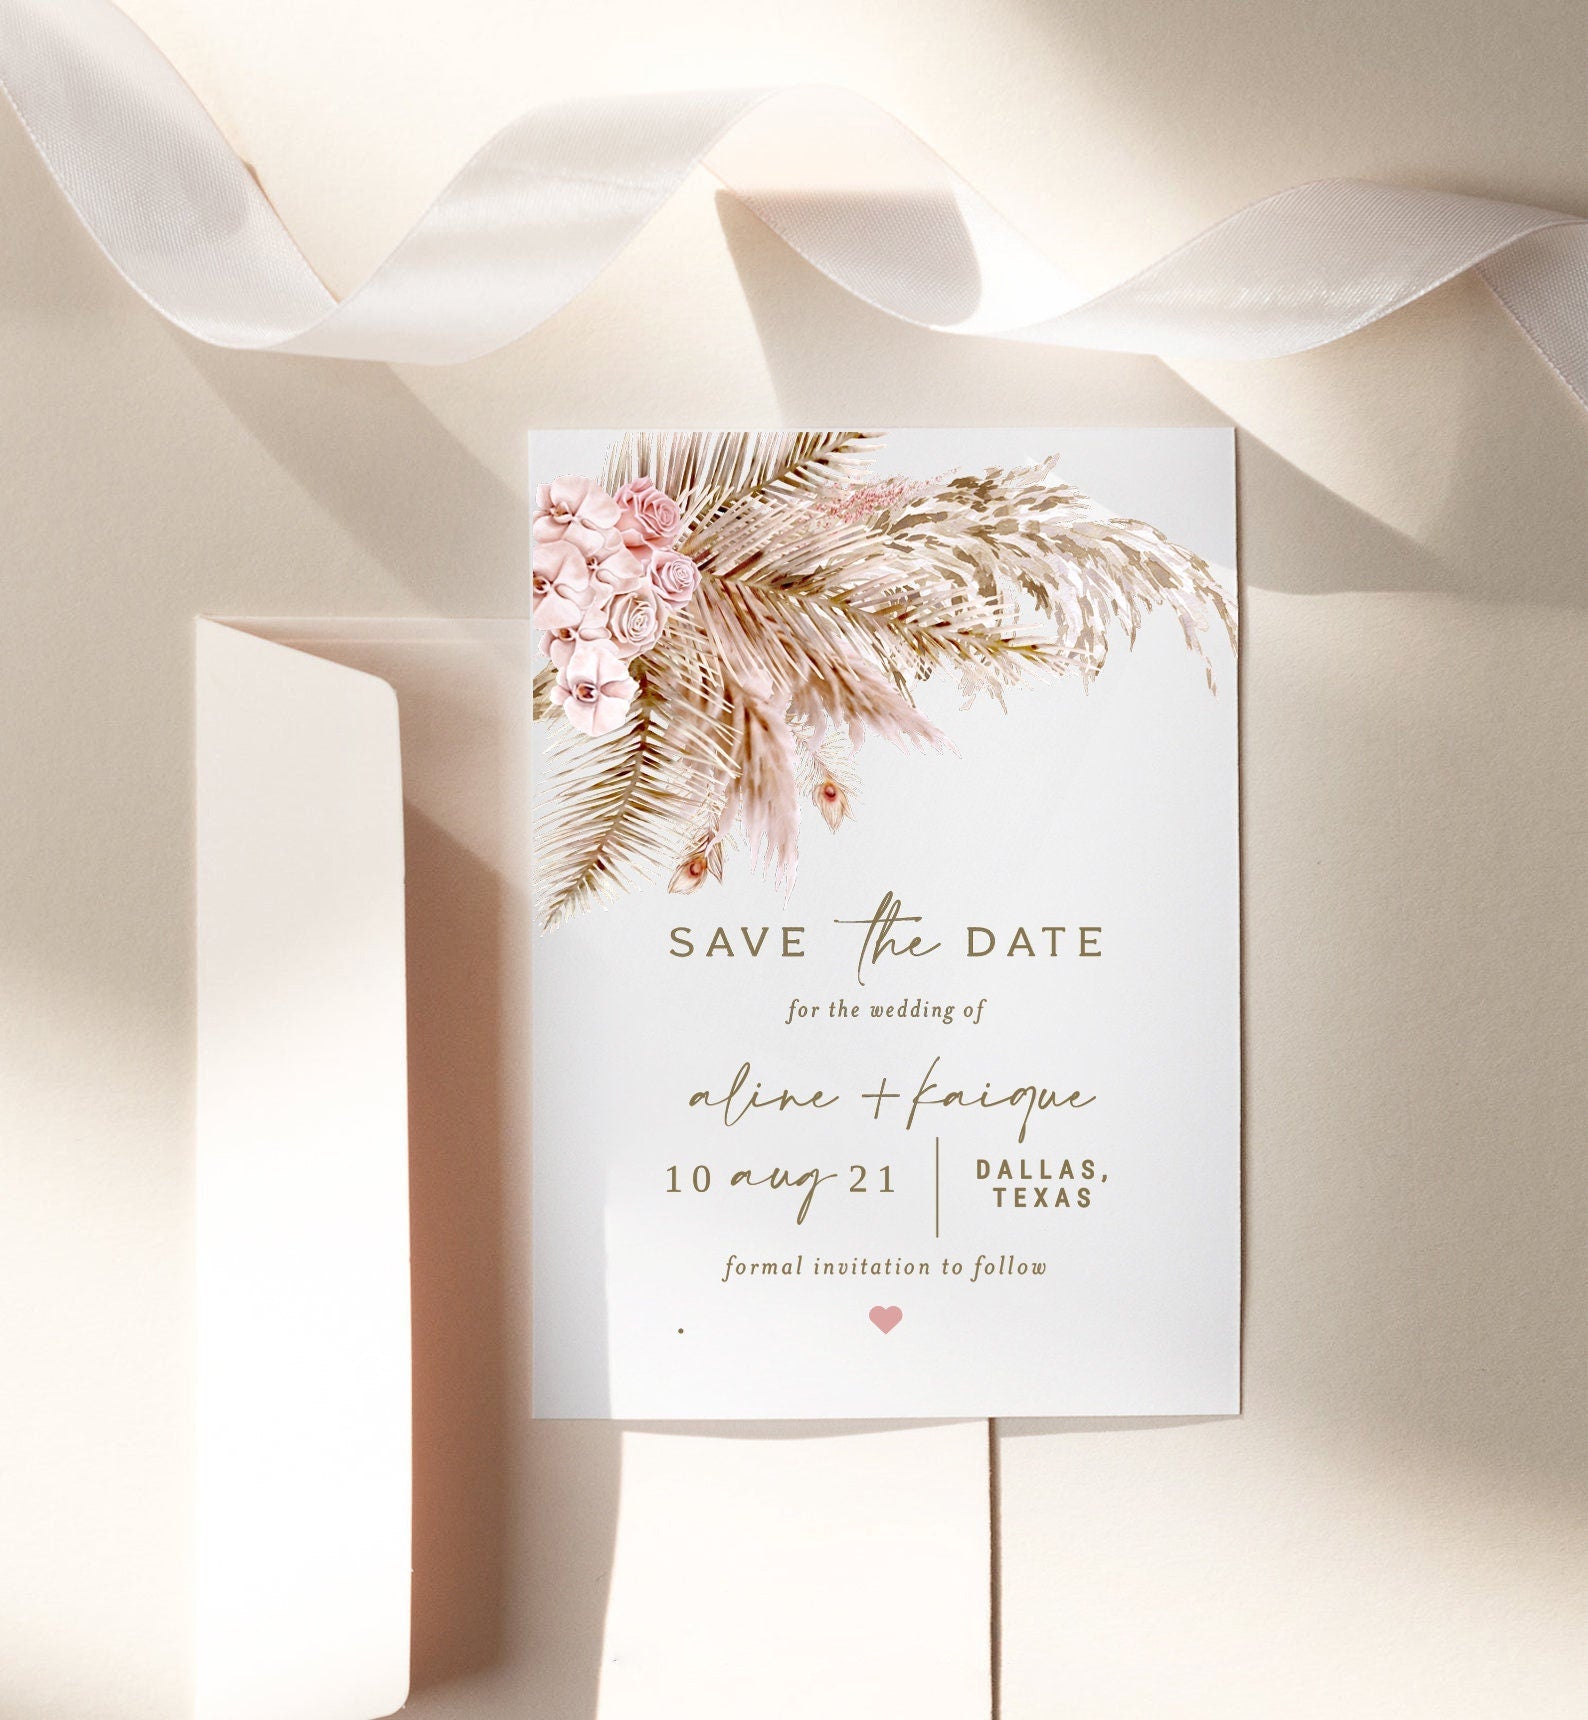 Pampas Grass Save the Date Template, Pampas Grass Save the Date, Bohemian Save the Date, Desert Boho Save the Date, Fall Autumn DIY